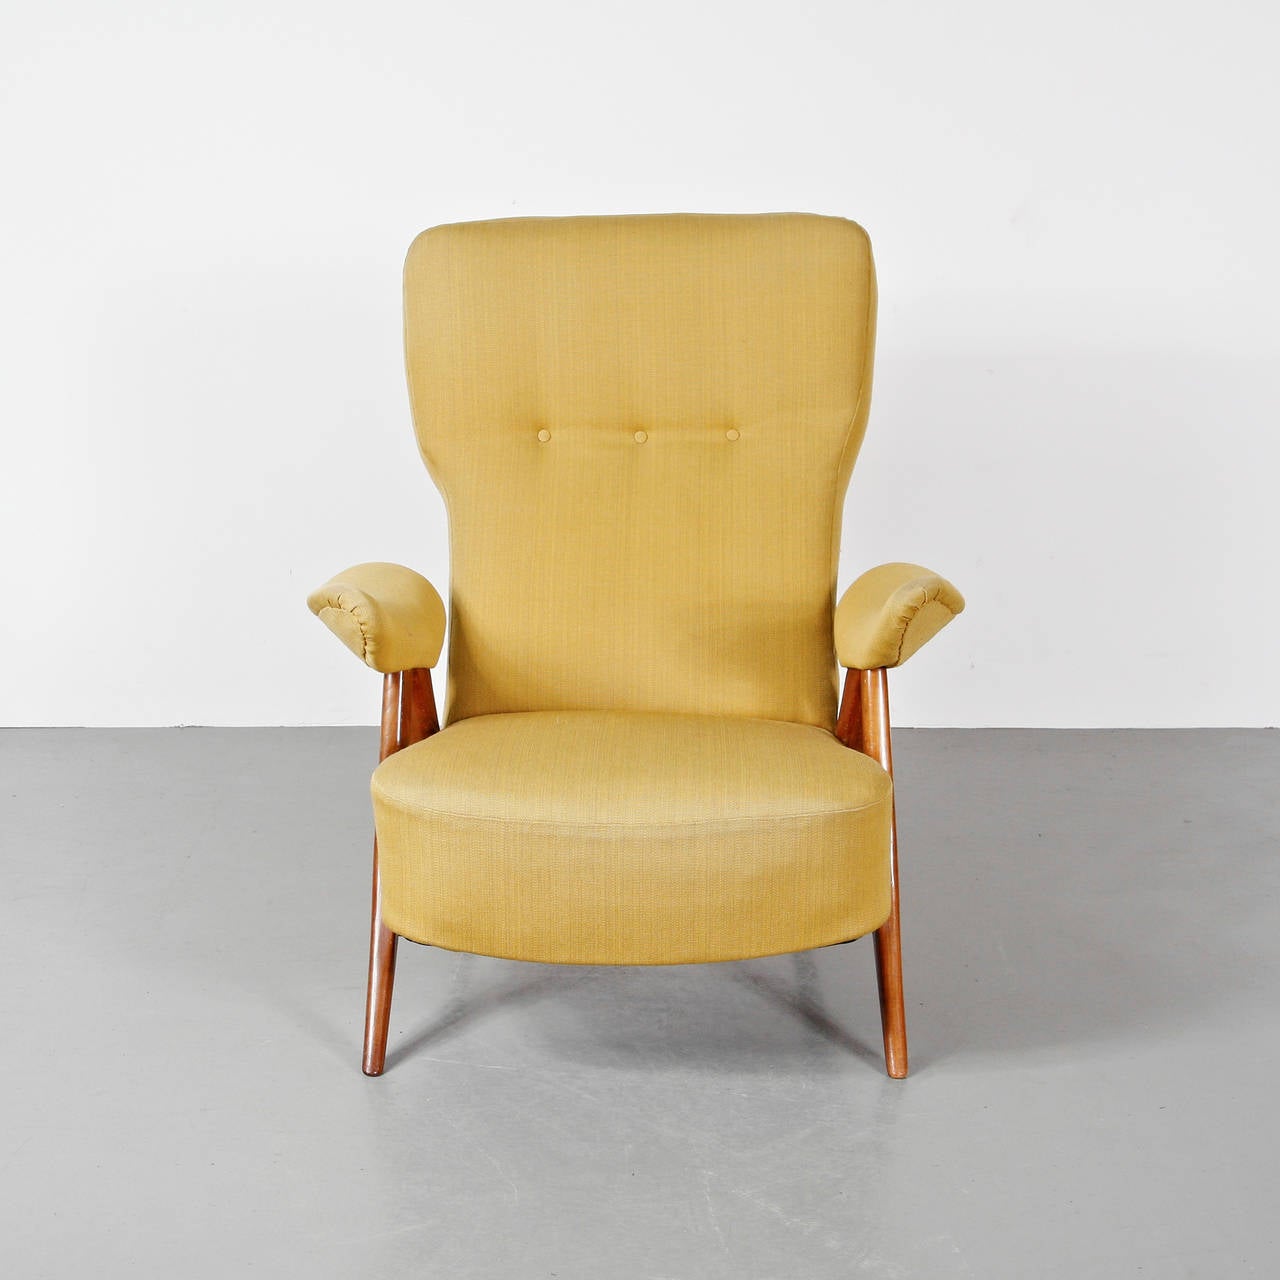 Lounge chair designed by Theo Ruth, circa 1950.
Manufactured by Artifort (Netherlands).
Wood legs and structure, deep foam newly upholstered in fabric seat and backrest. In good condition, with minor wear consistent with age and use.

Theo Ruth